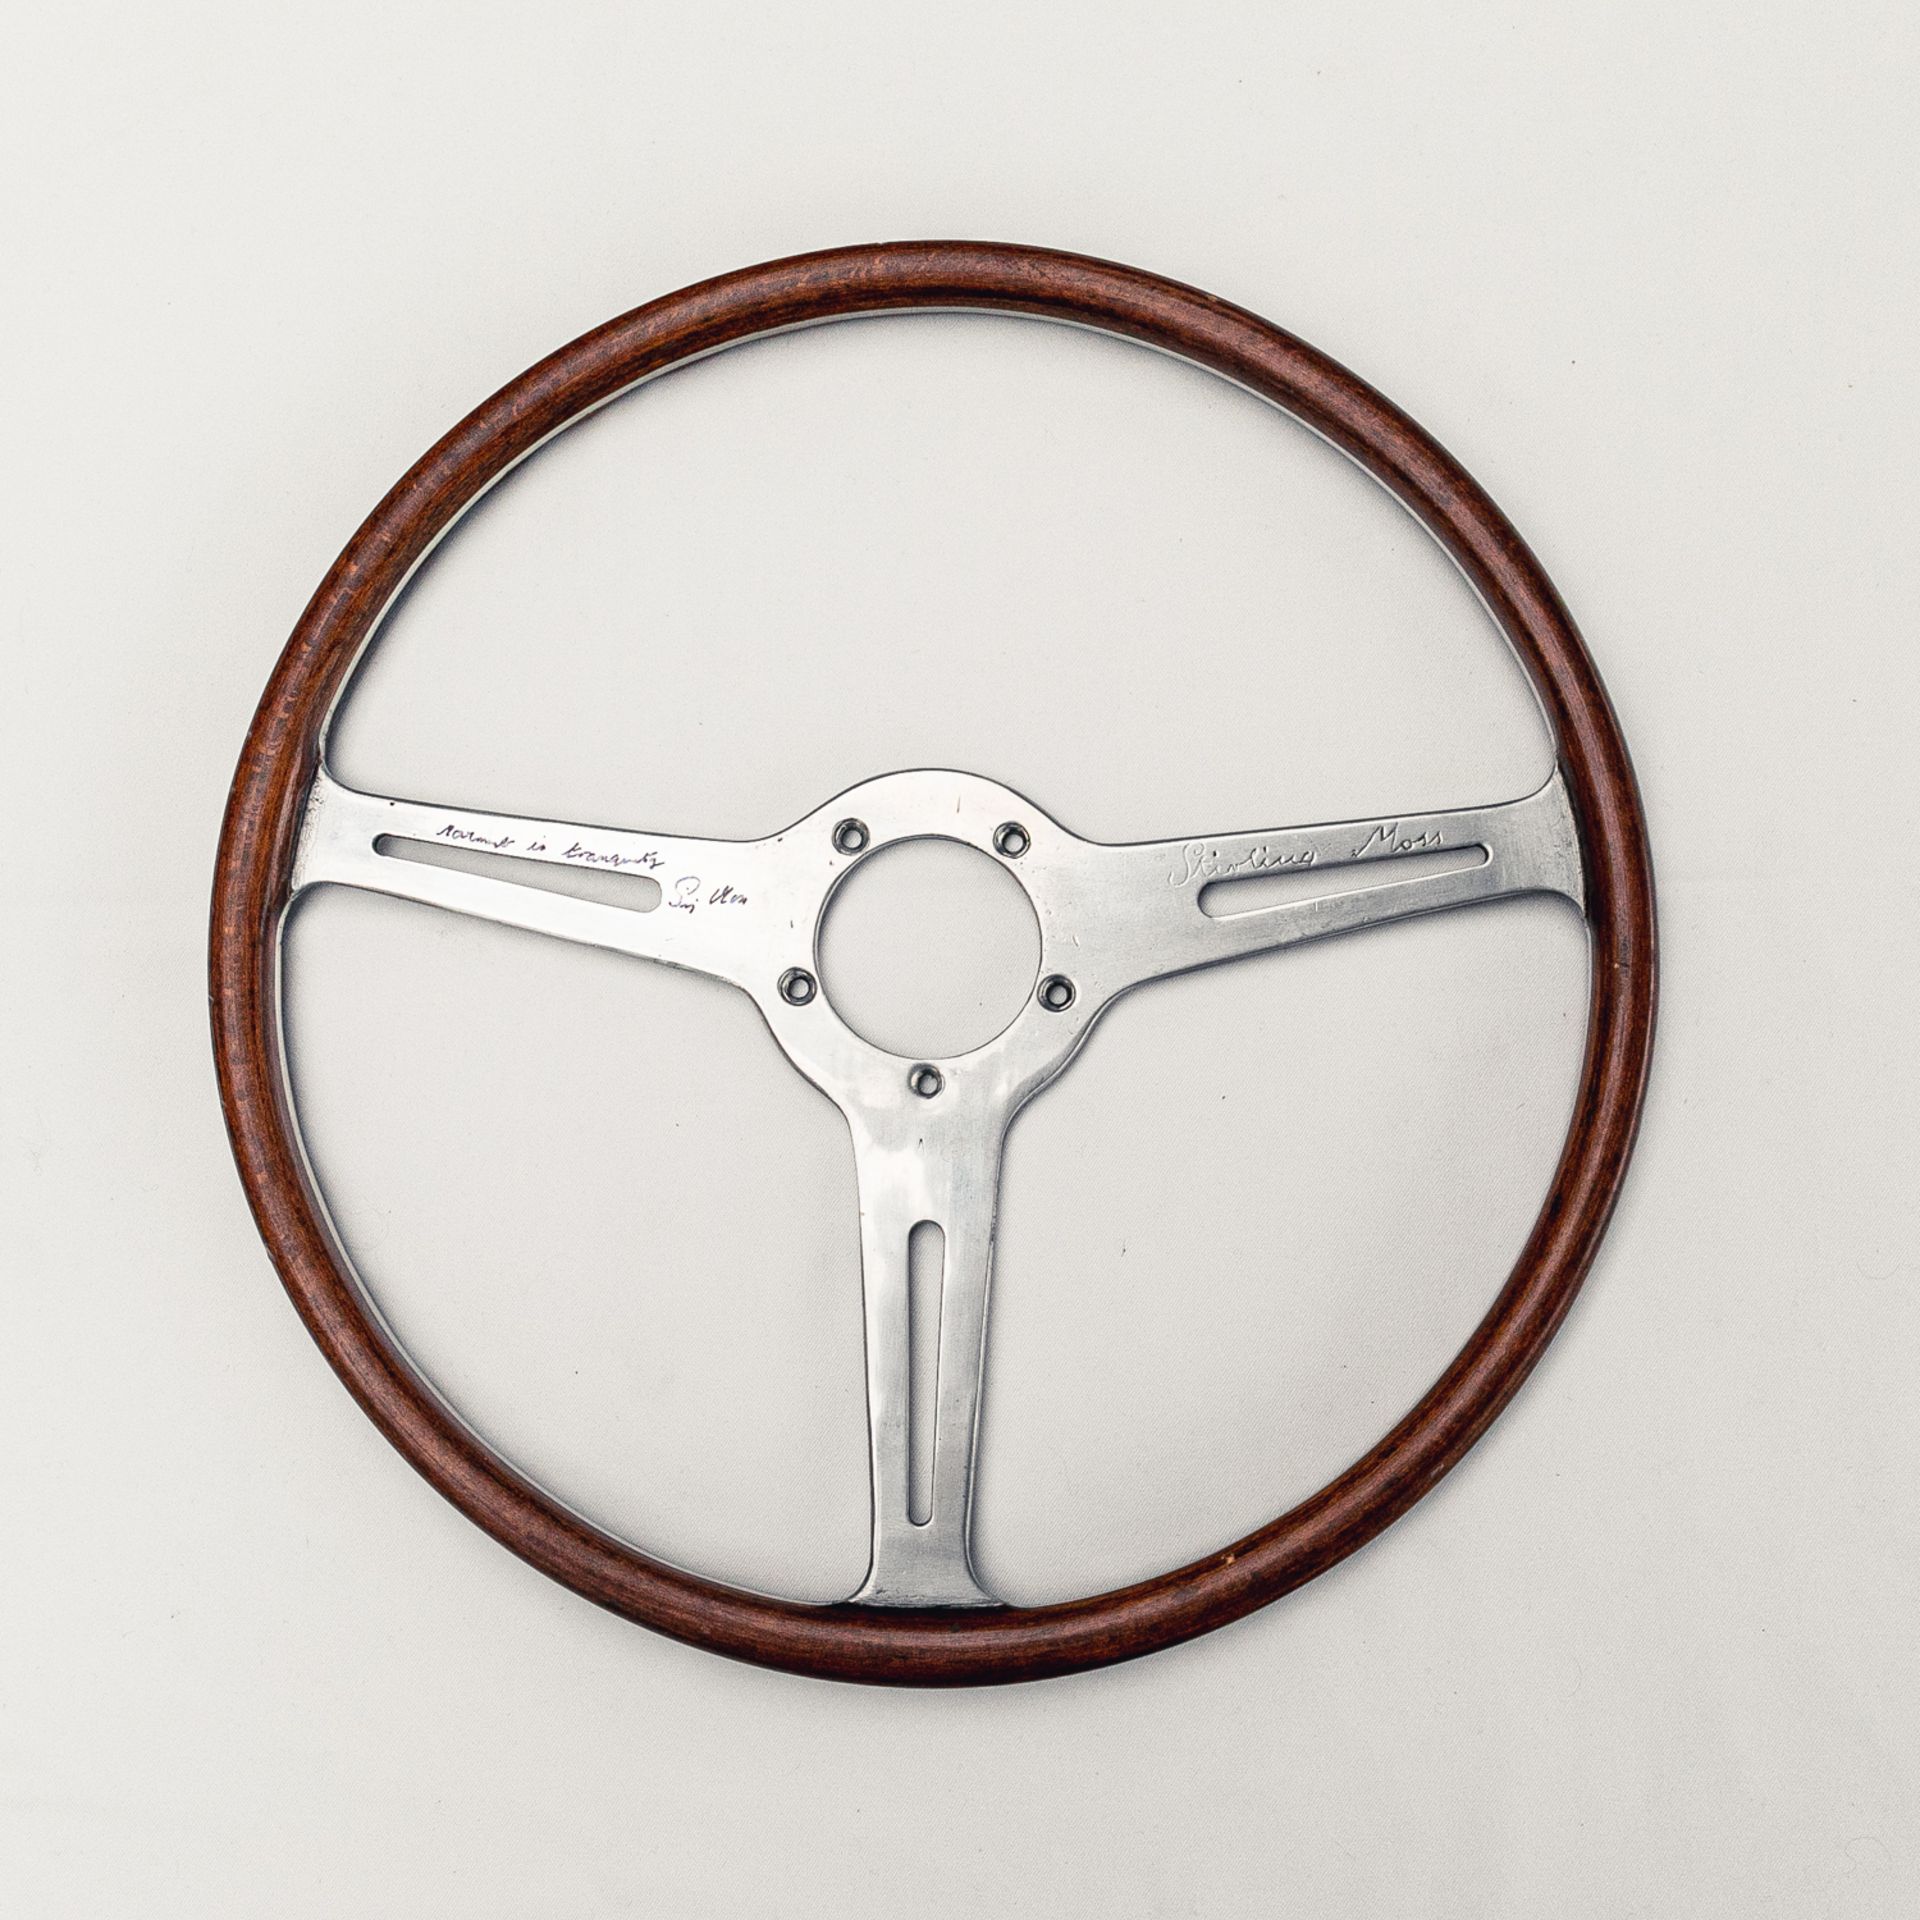 A race used period steering wheel hand signed by Stirling Moss